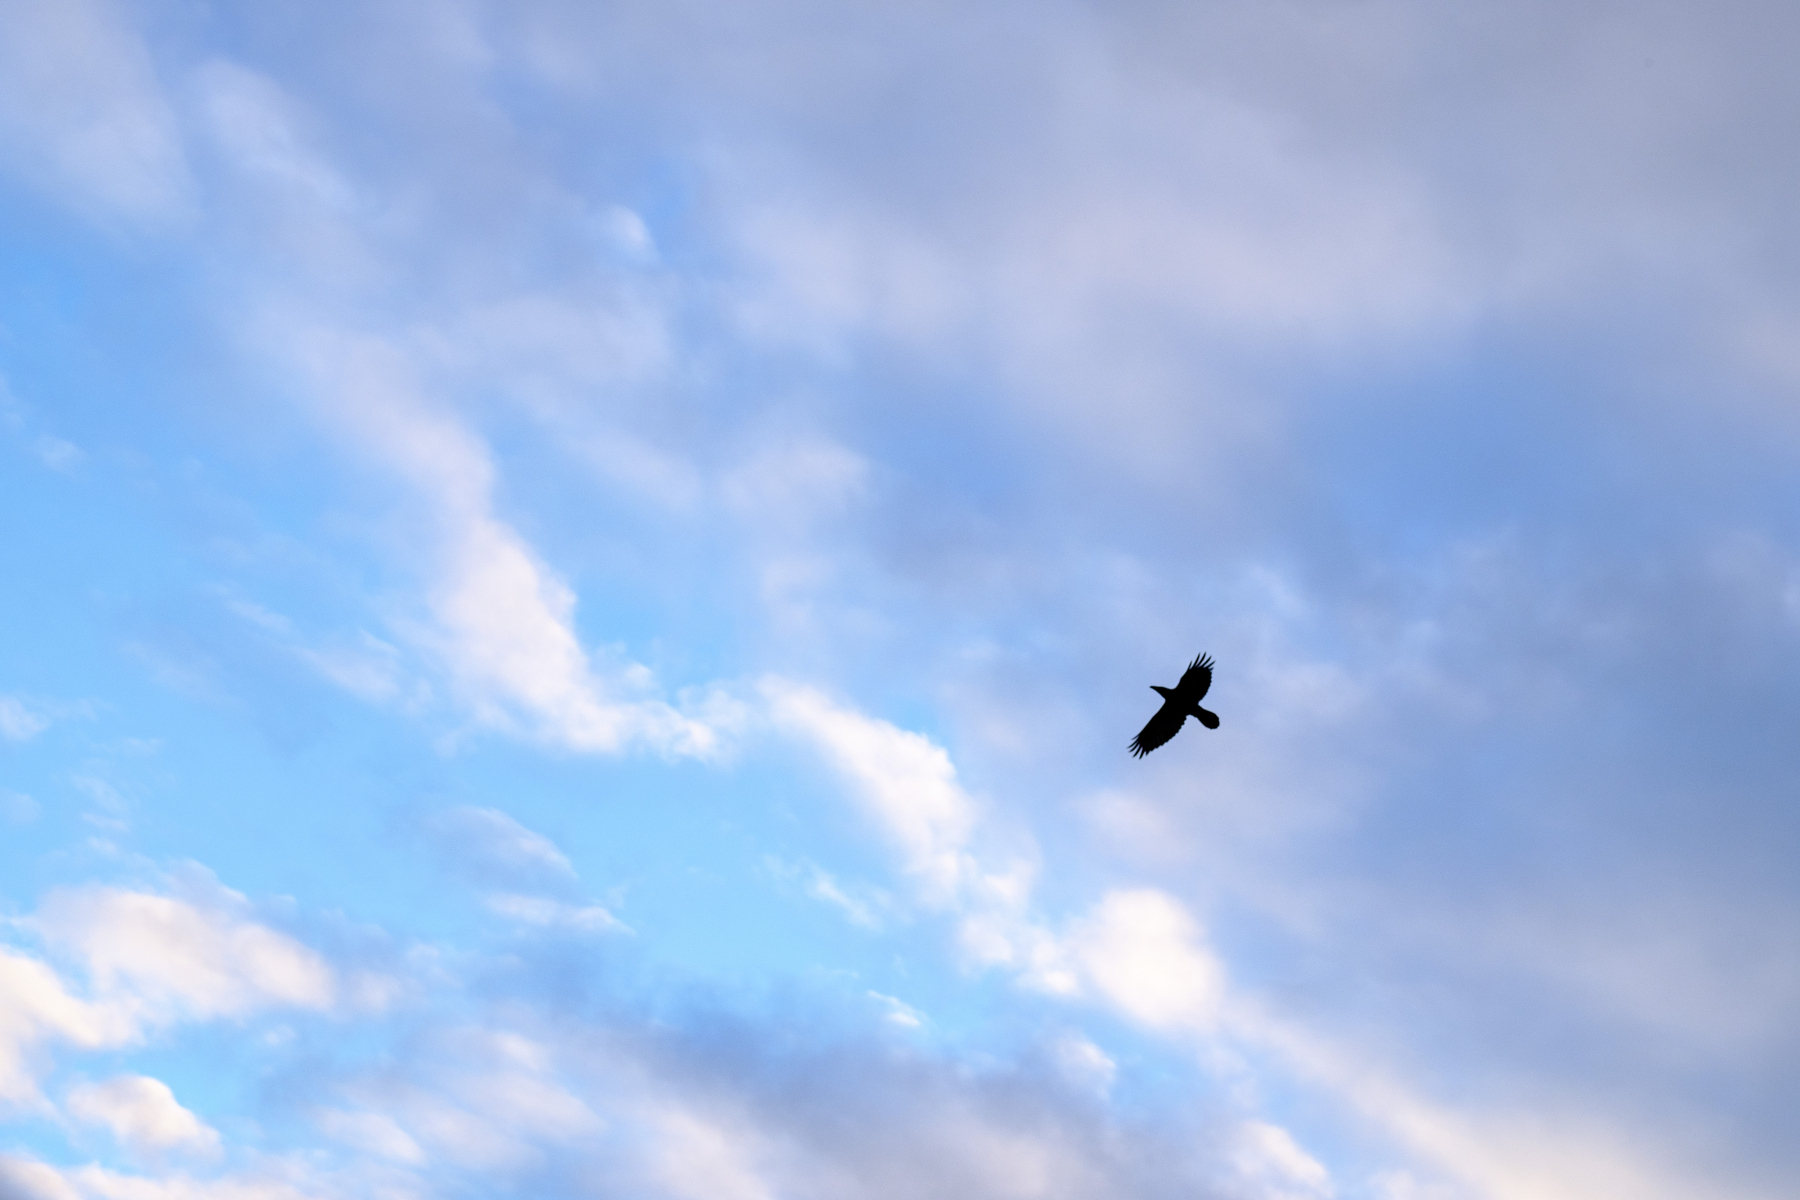 Another raven flying photo